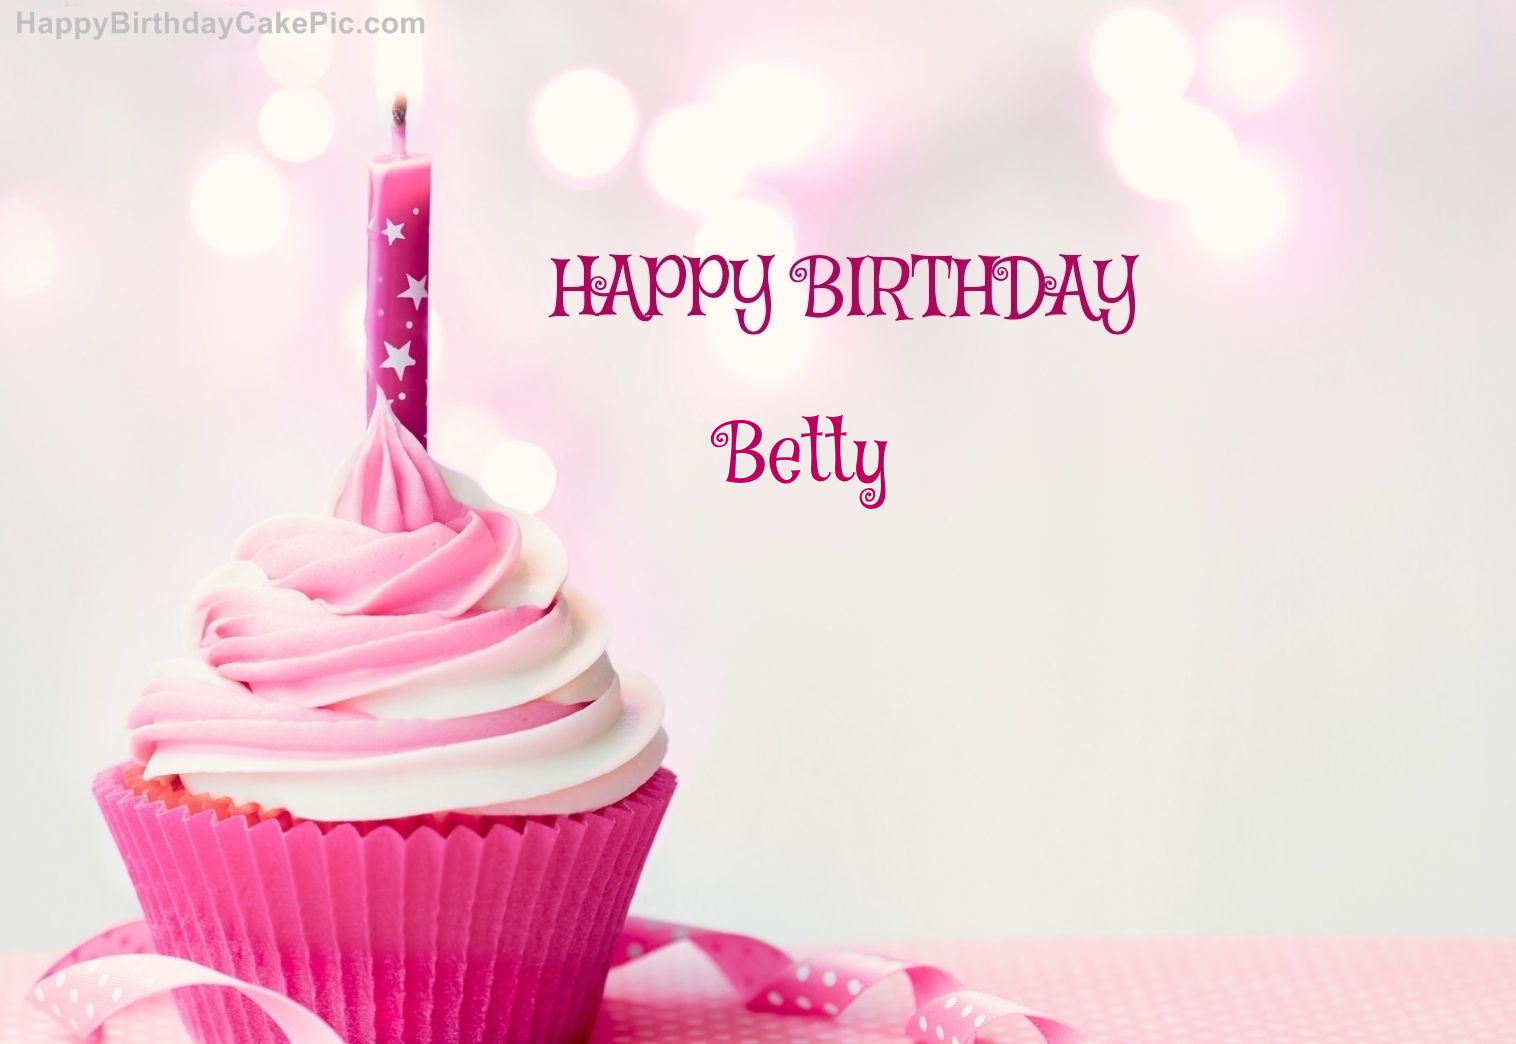 Image result for happy birthday betty cupcake image